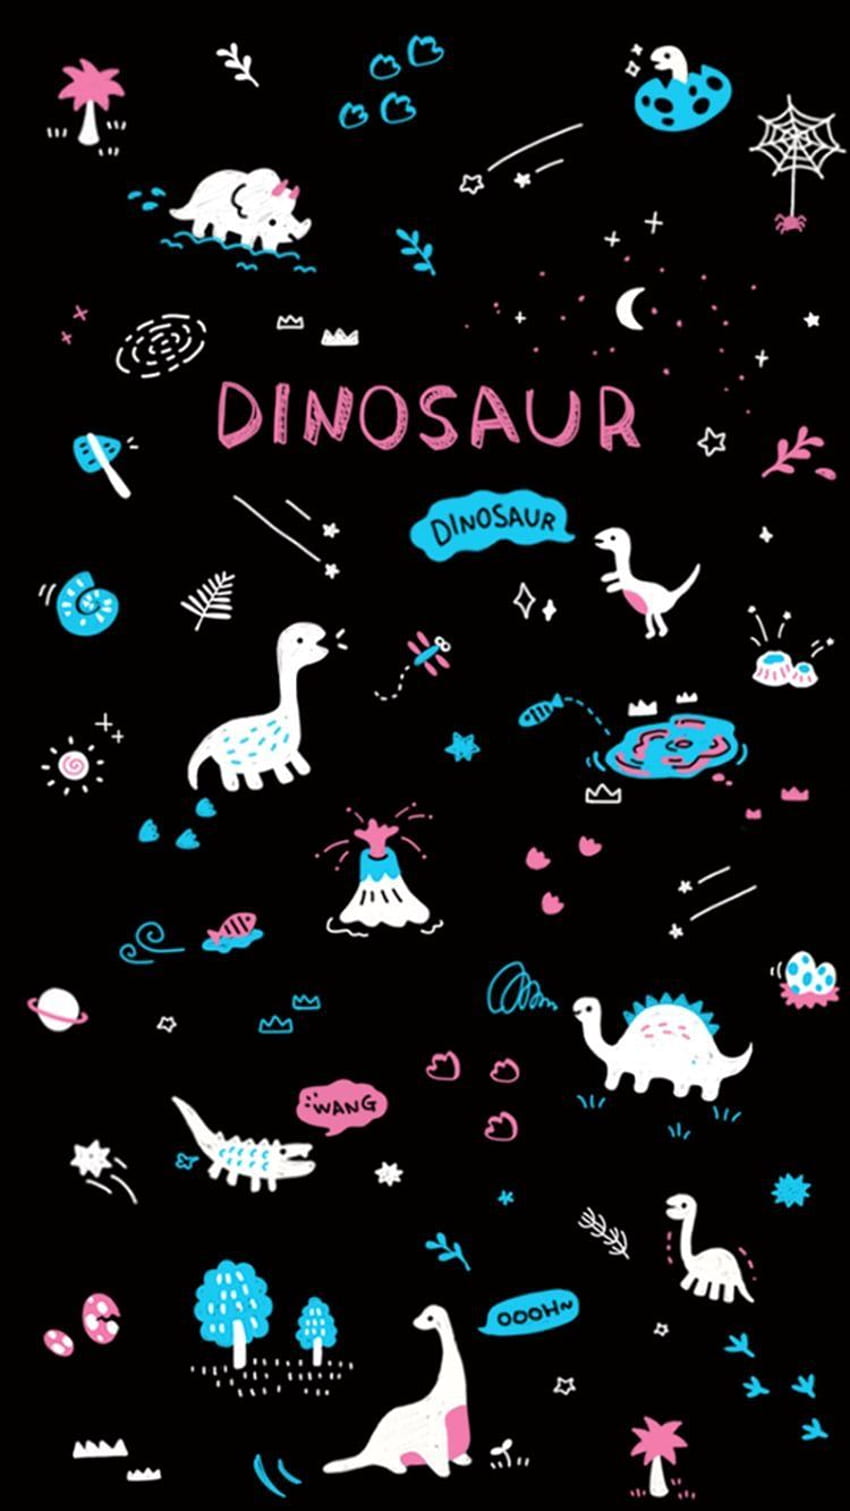 IPhone Wallpaper Dinosaur with high-resolution 1080x1920 pixel. You can use this wallpaper for your iPhone 5, 6, 7, 8, X, XS, XR backgrounds, Mobile Screensaver, or iPad Lock Screen - Dinosaur